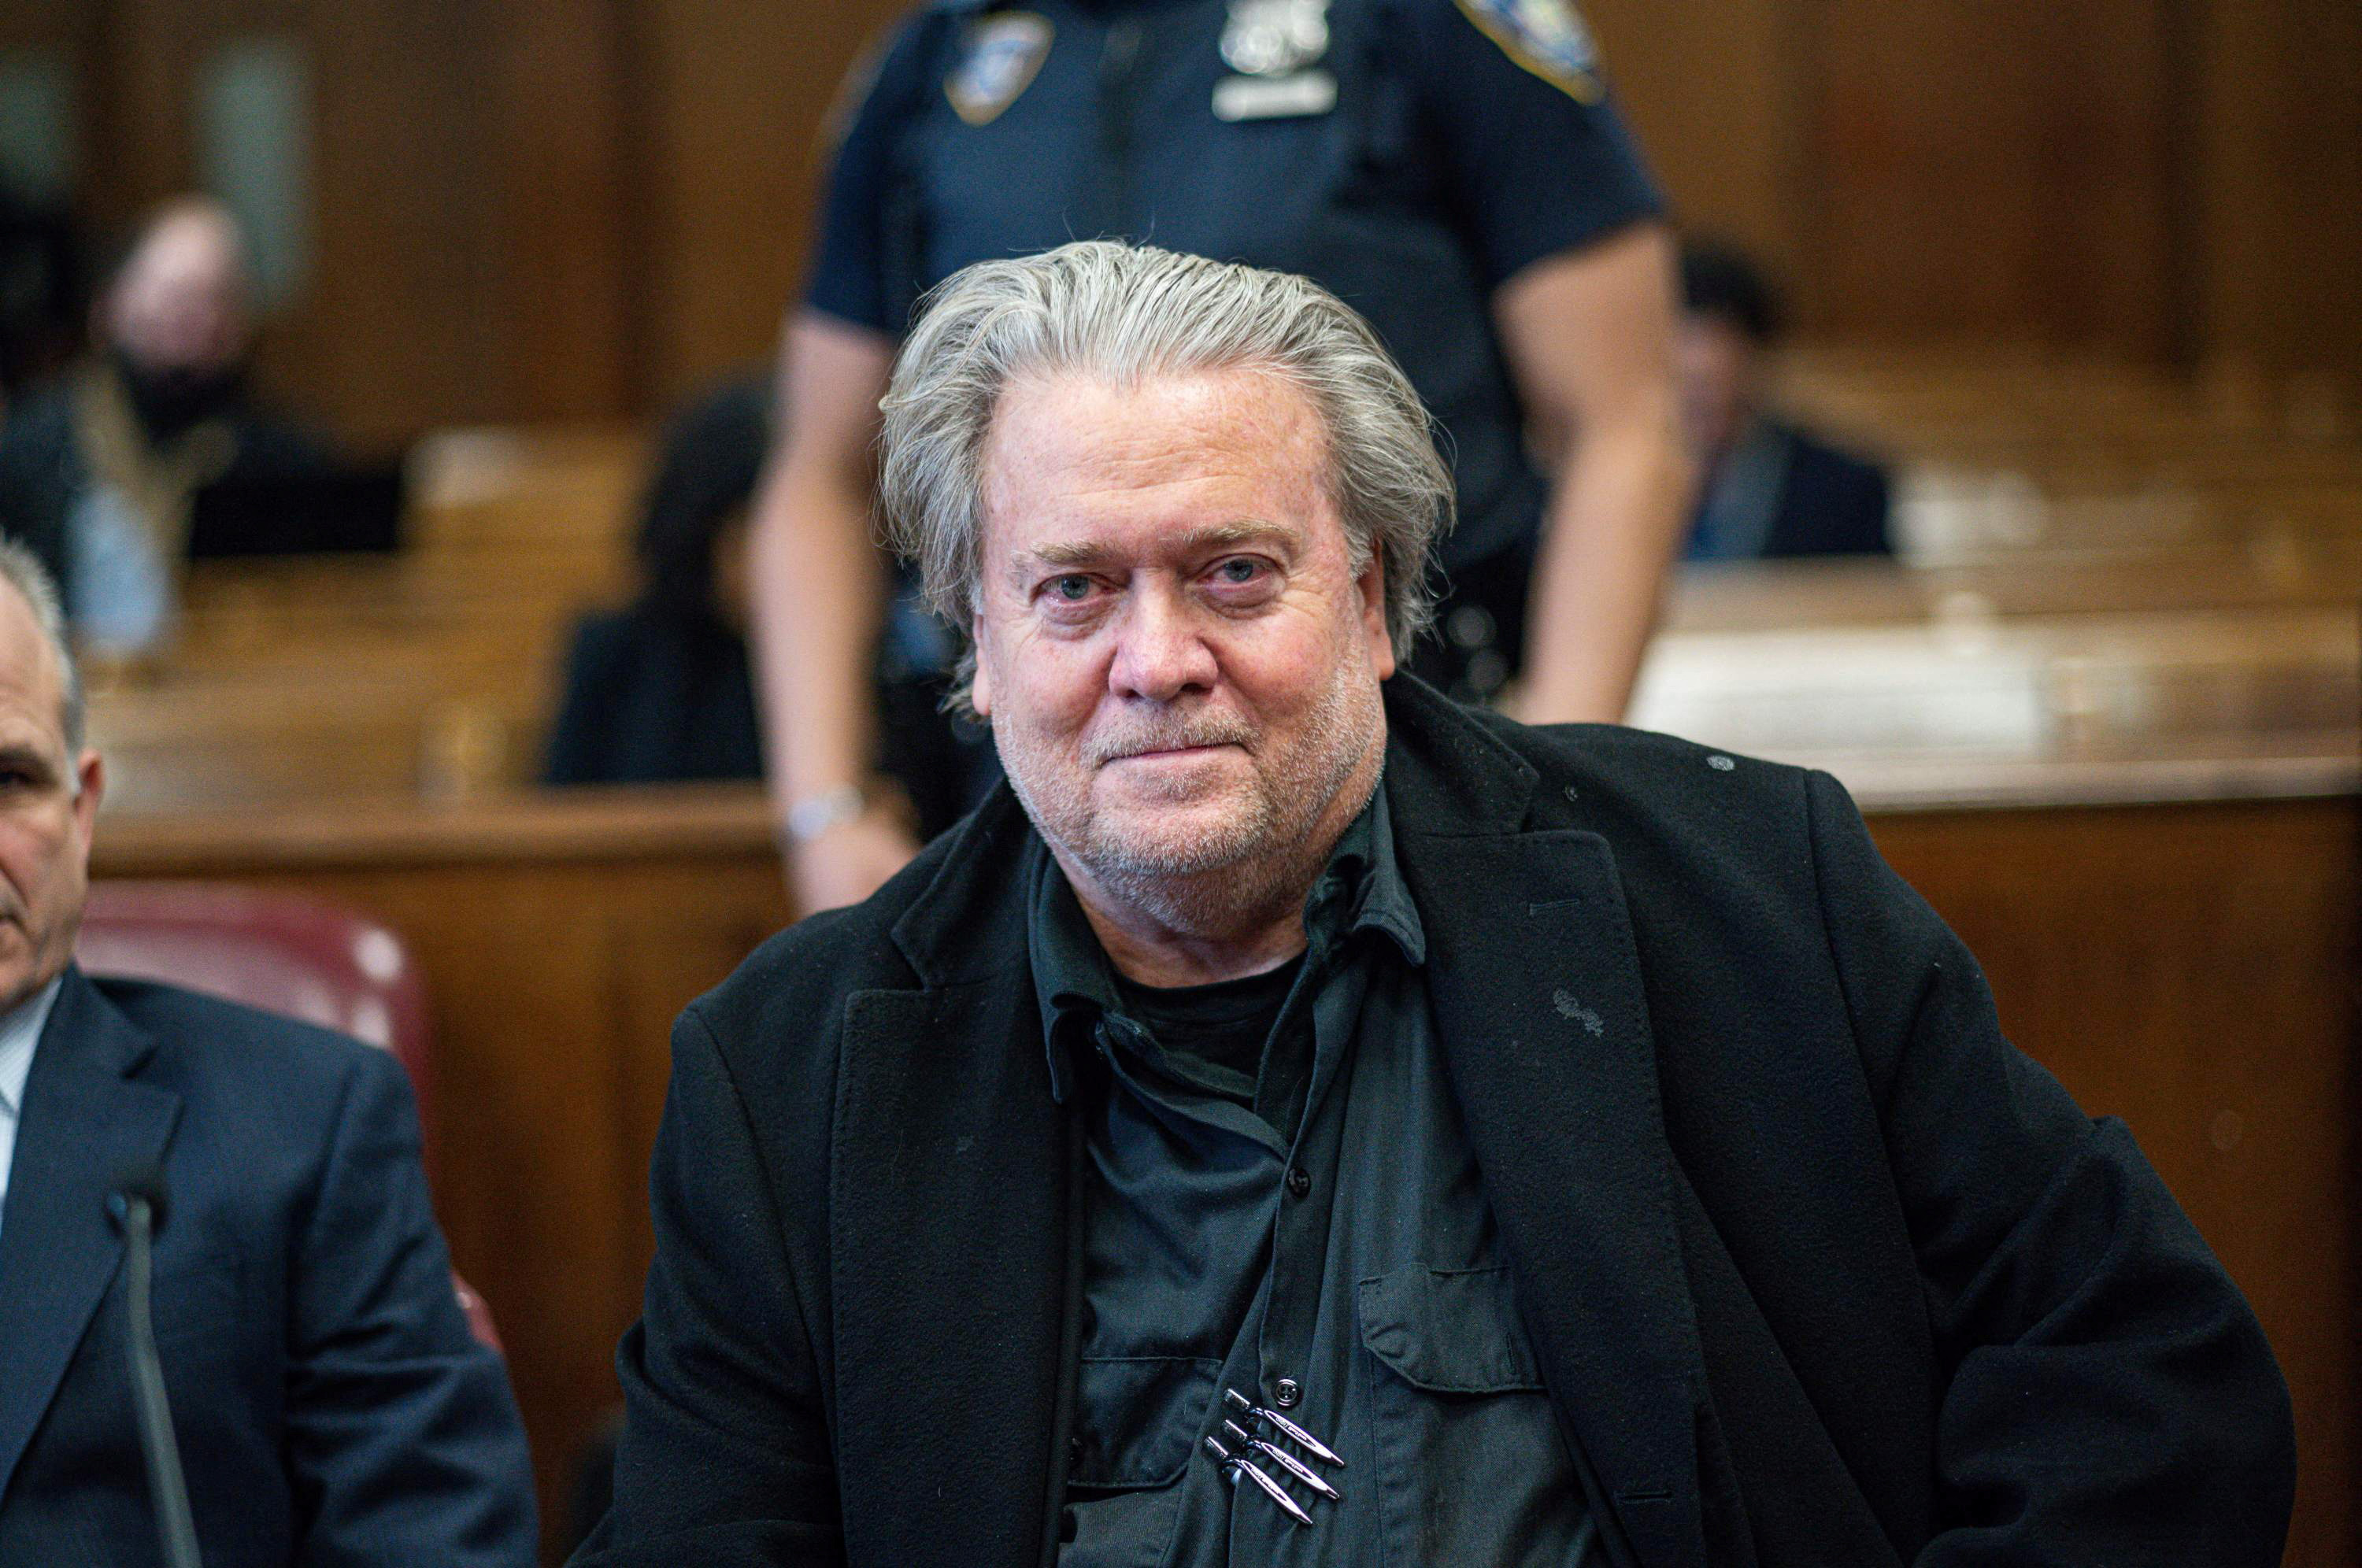 Former White House Chief Strategist Steve Bannon sits during his appearance at New York Supreme Court in New York City